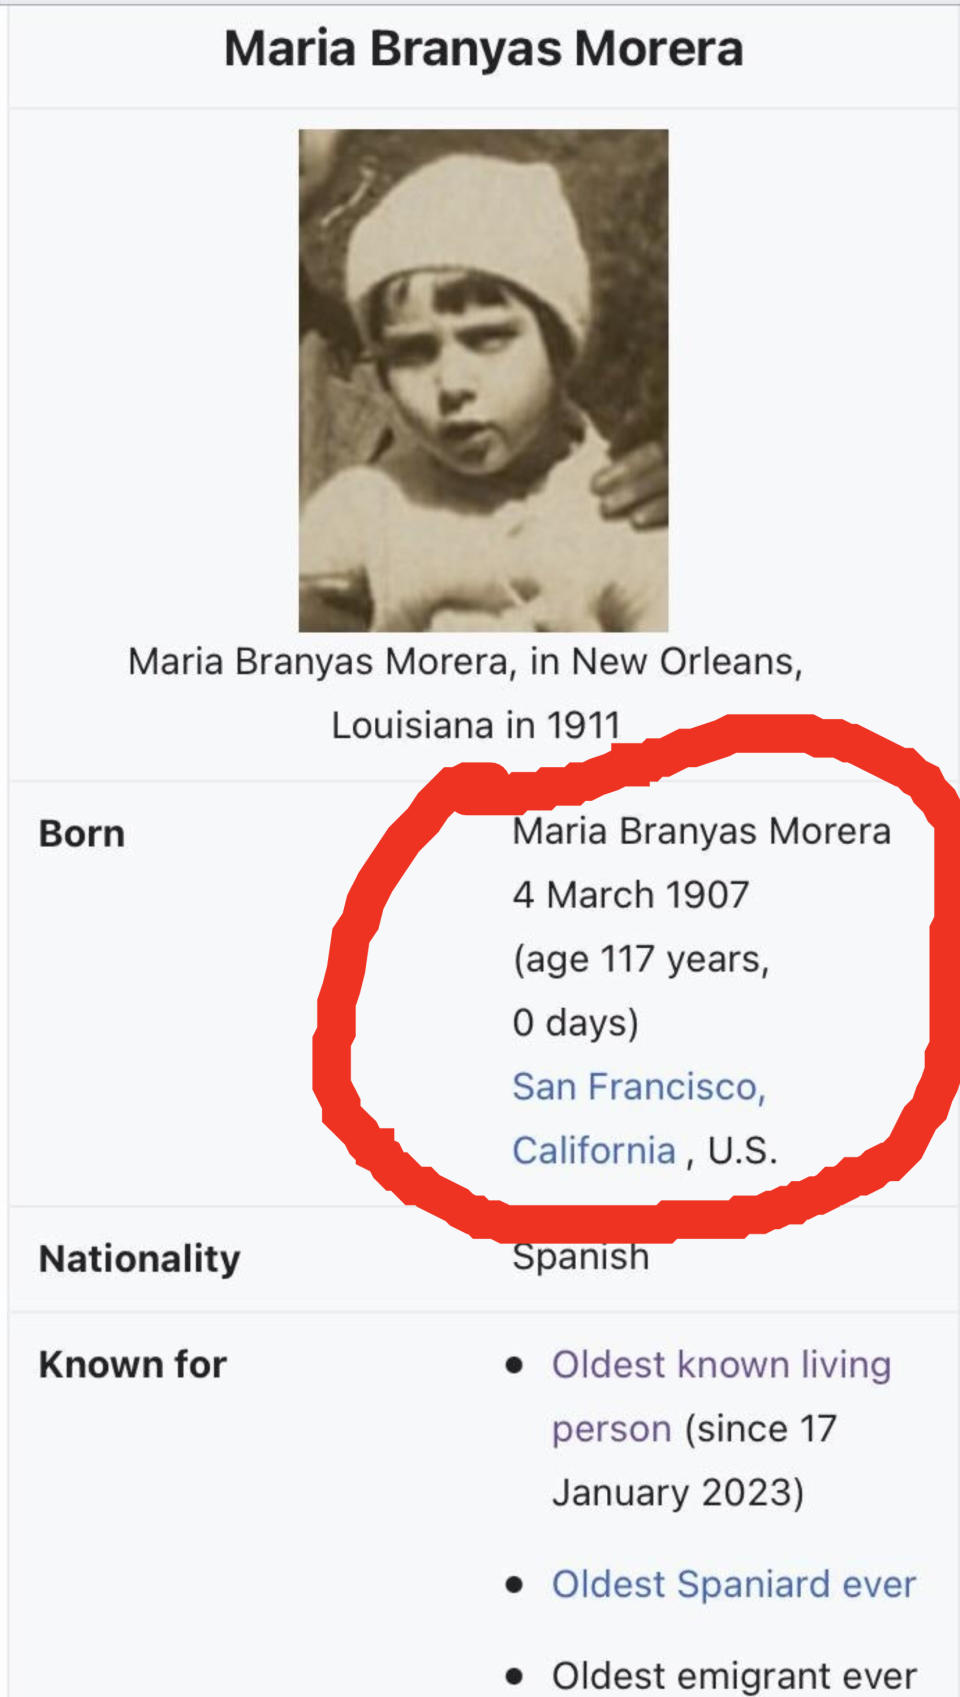 Maria Branyas Morena's Wikipedia page section with photo and facts including birth date and nationality